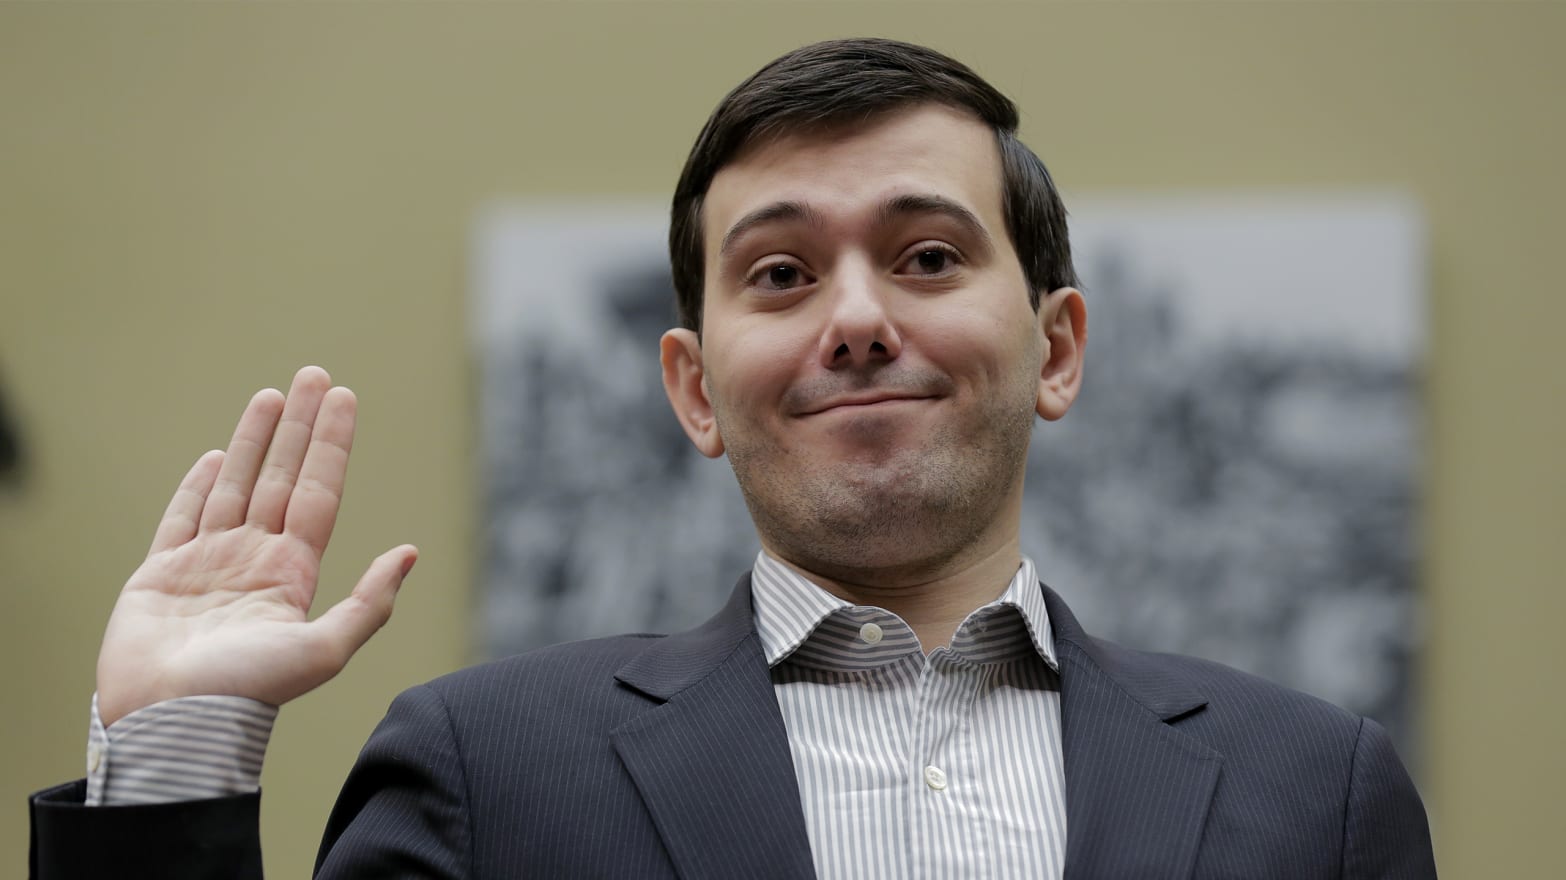 18-mind-blowing-facts-about-martin-shkreli